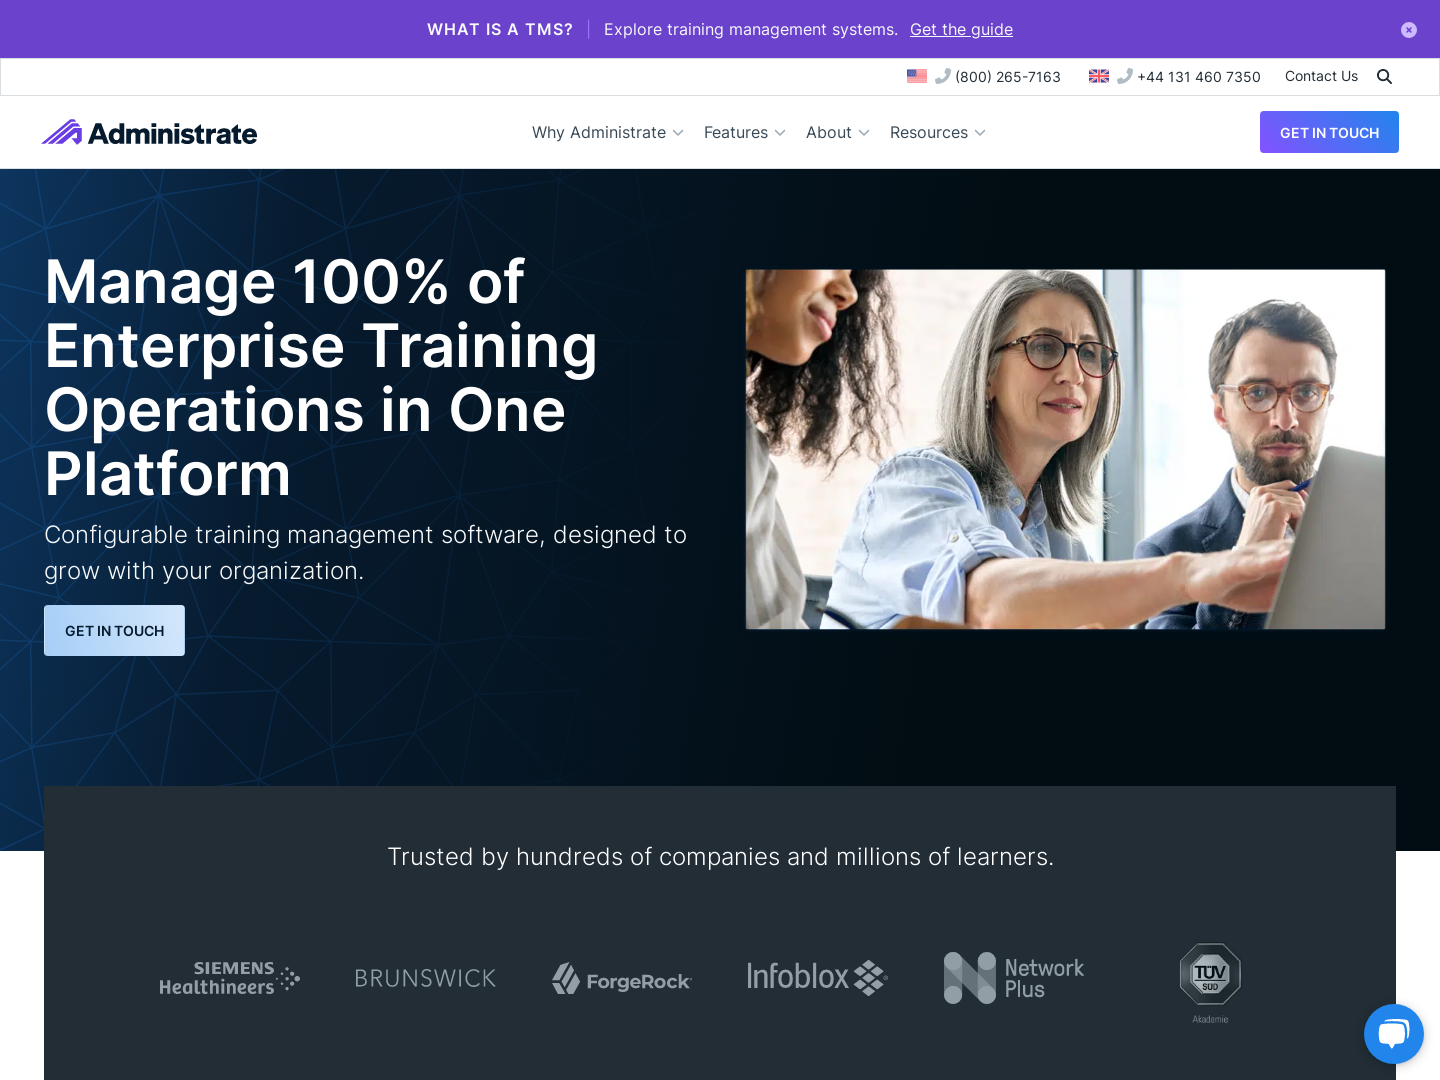 Administrate Secures $6.4M Funding to Expand Enterprise Training